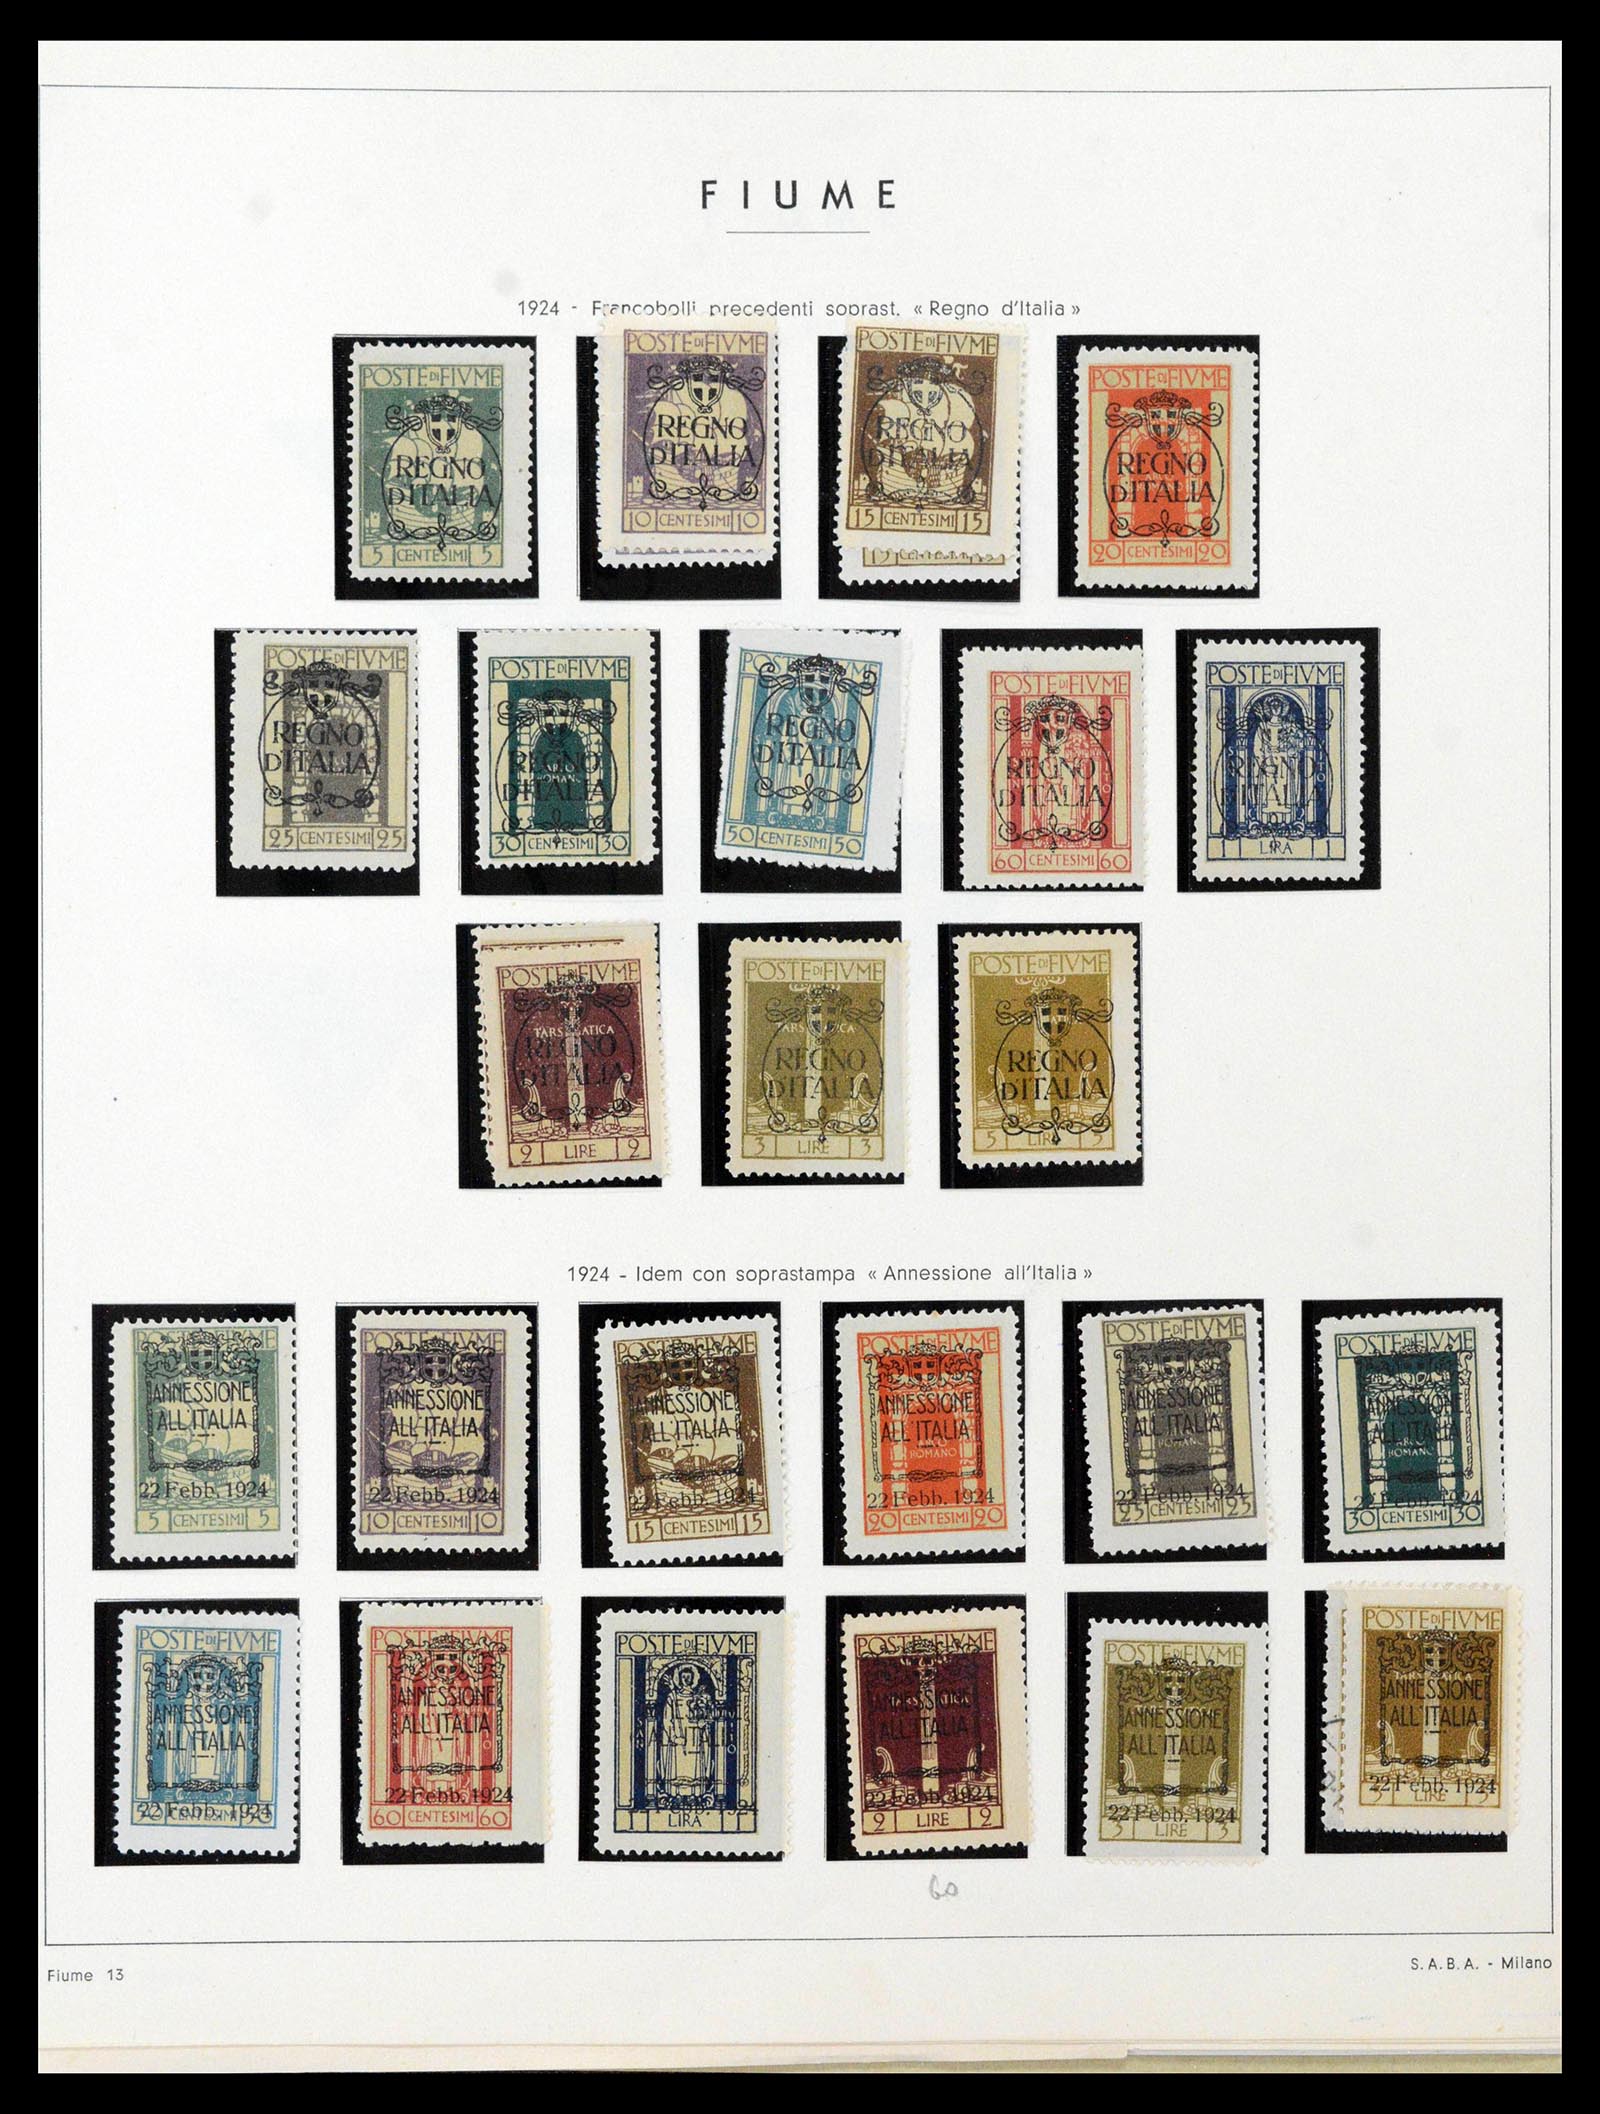 38506 0014 - Stamp collection 38506 Fiume 1920-1924.